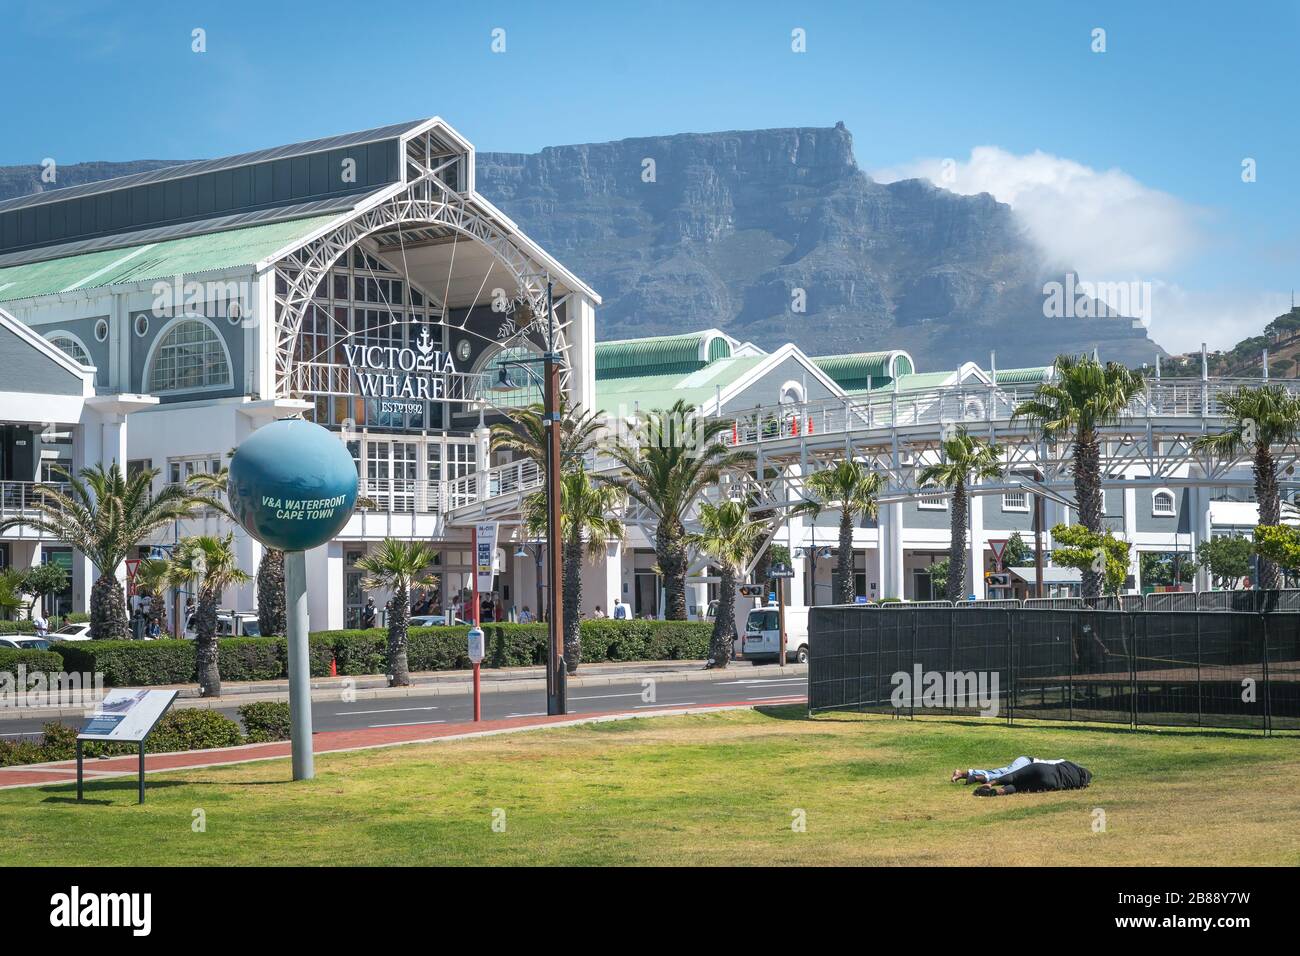 Cape Town, South Africa - November 25, 2019 - Victoria and Albert  Waterfront shopping centre and Table Mountain view in the background Stock  Photo - Alamy